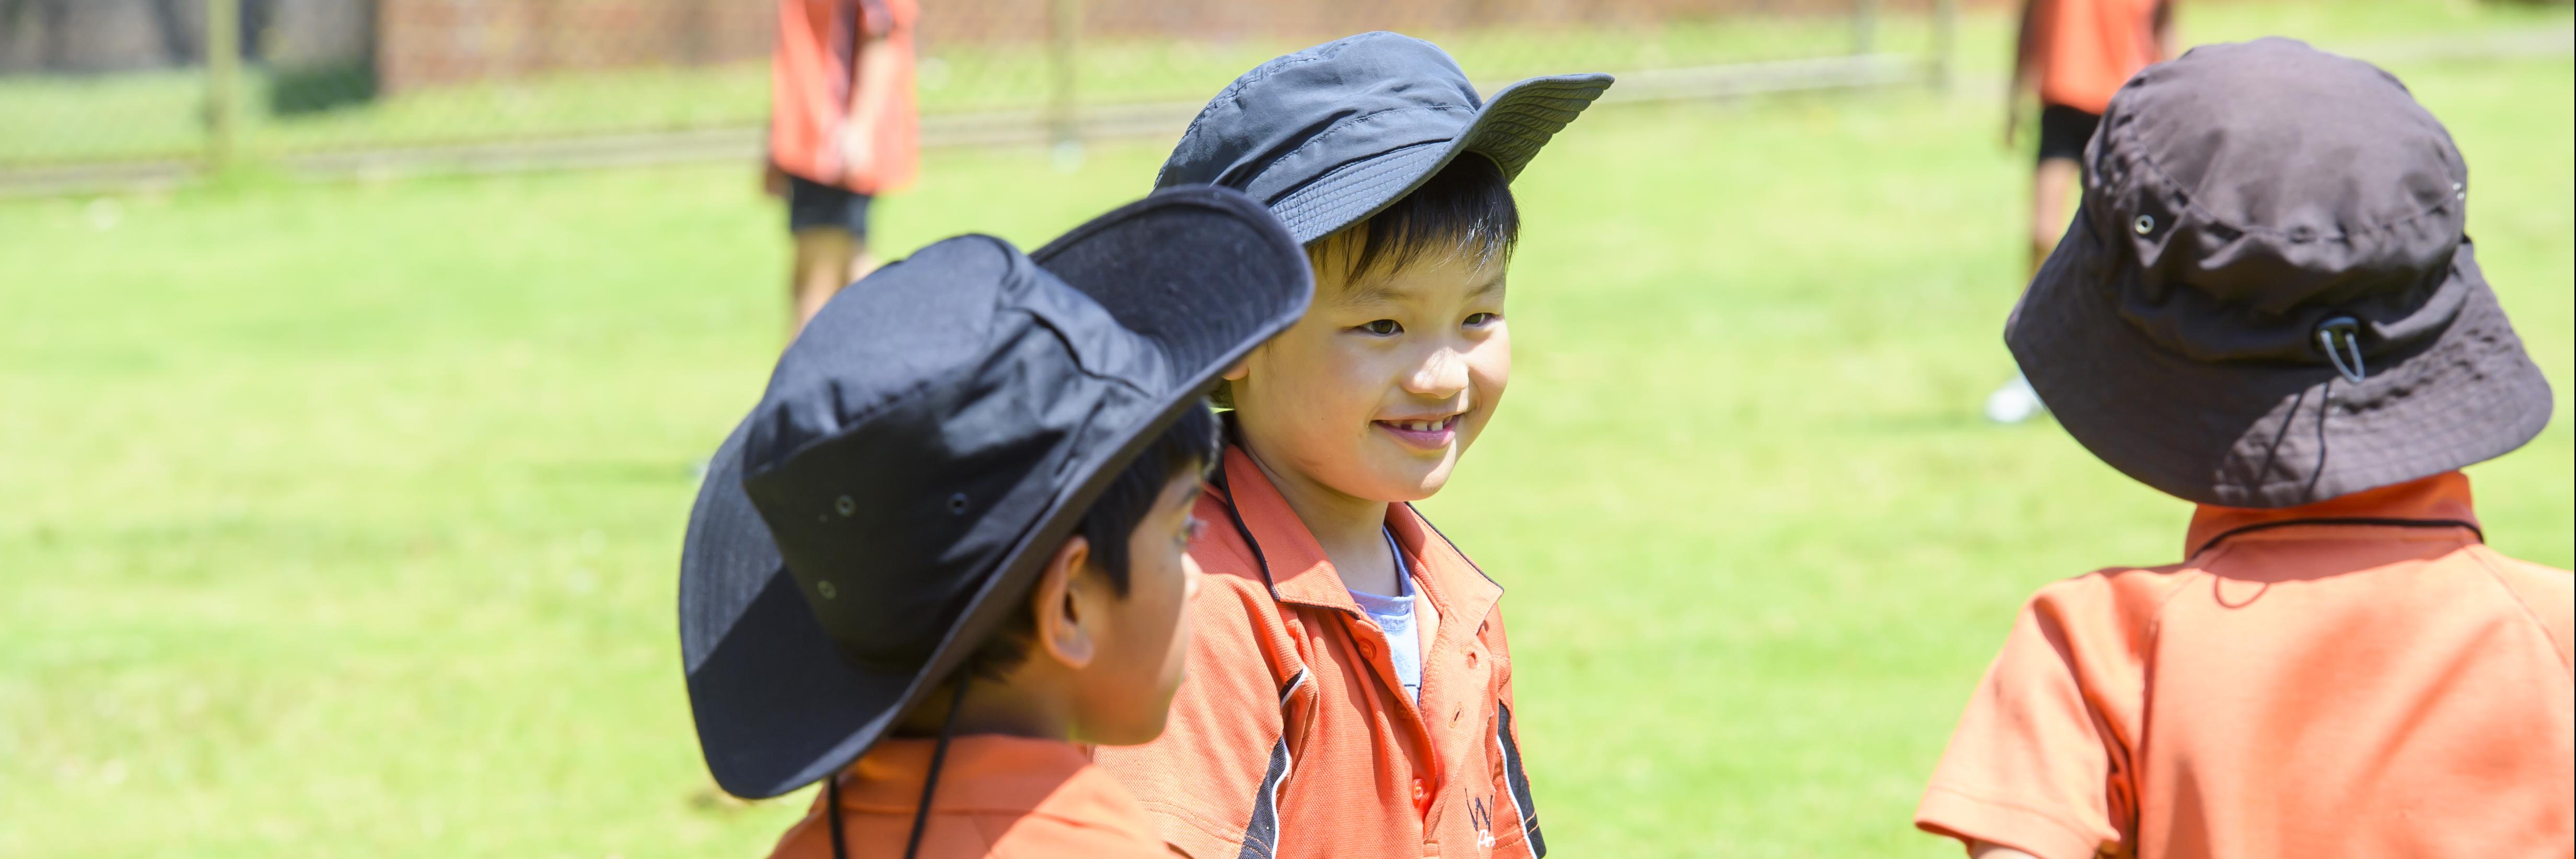 Three boys wearing hats smiling at each other during sport on the oval